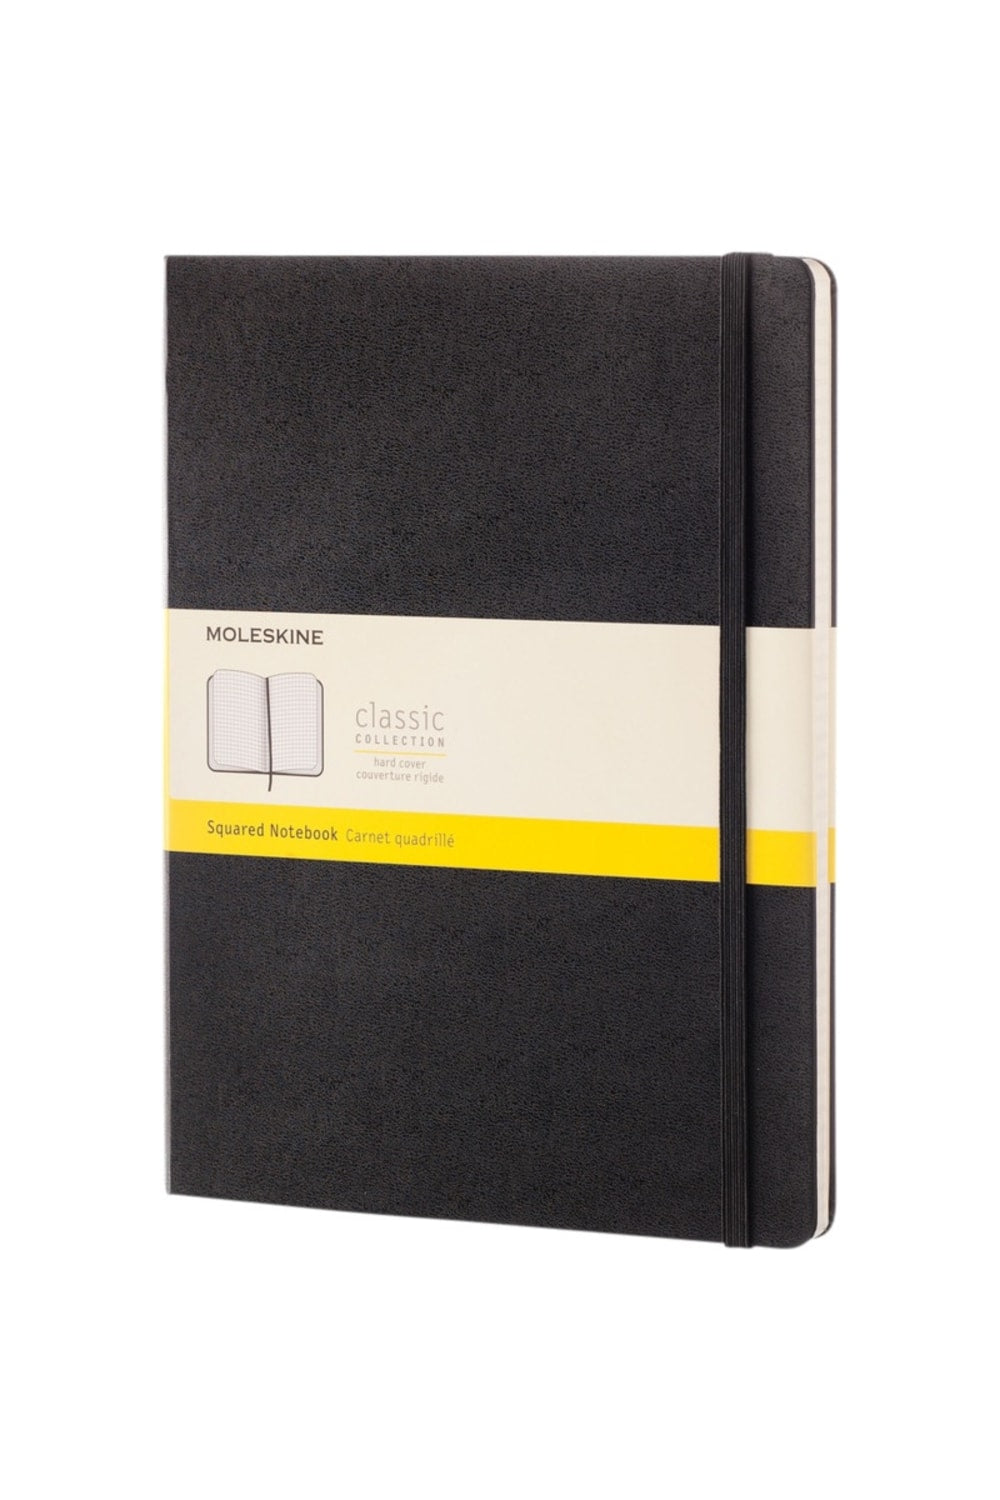 Moleskine Classic XL Hard Cover Squared Notebook (Solid Black) (One Size)